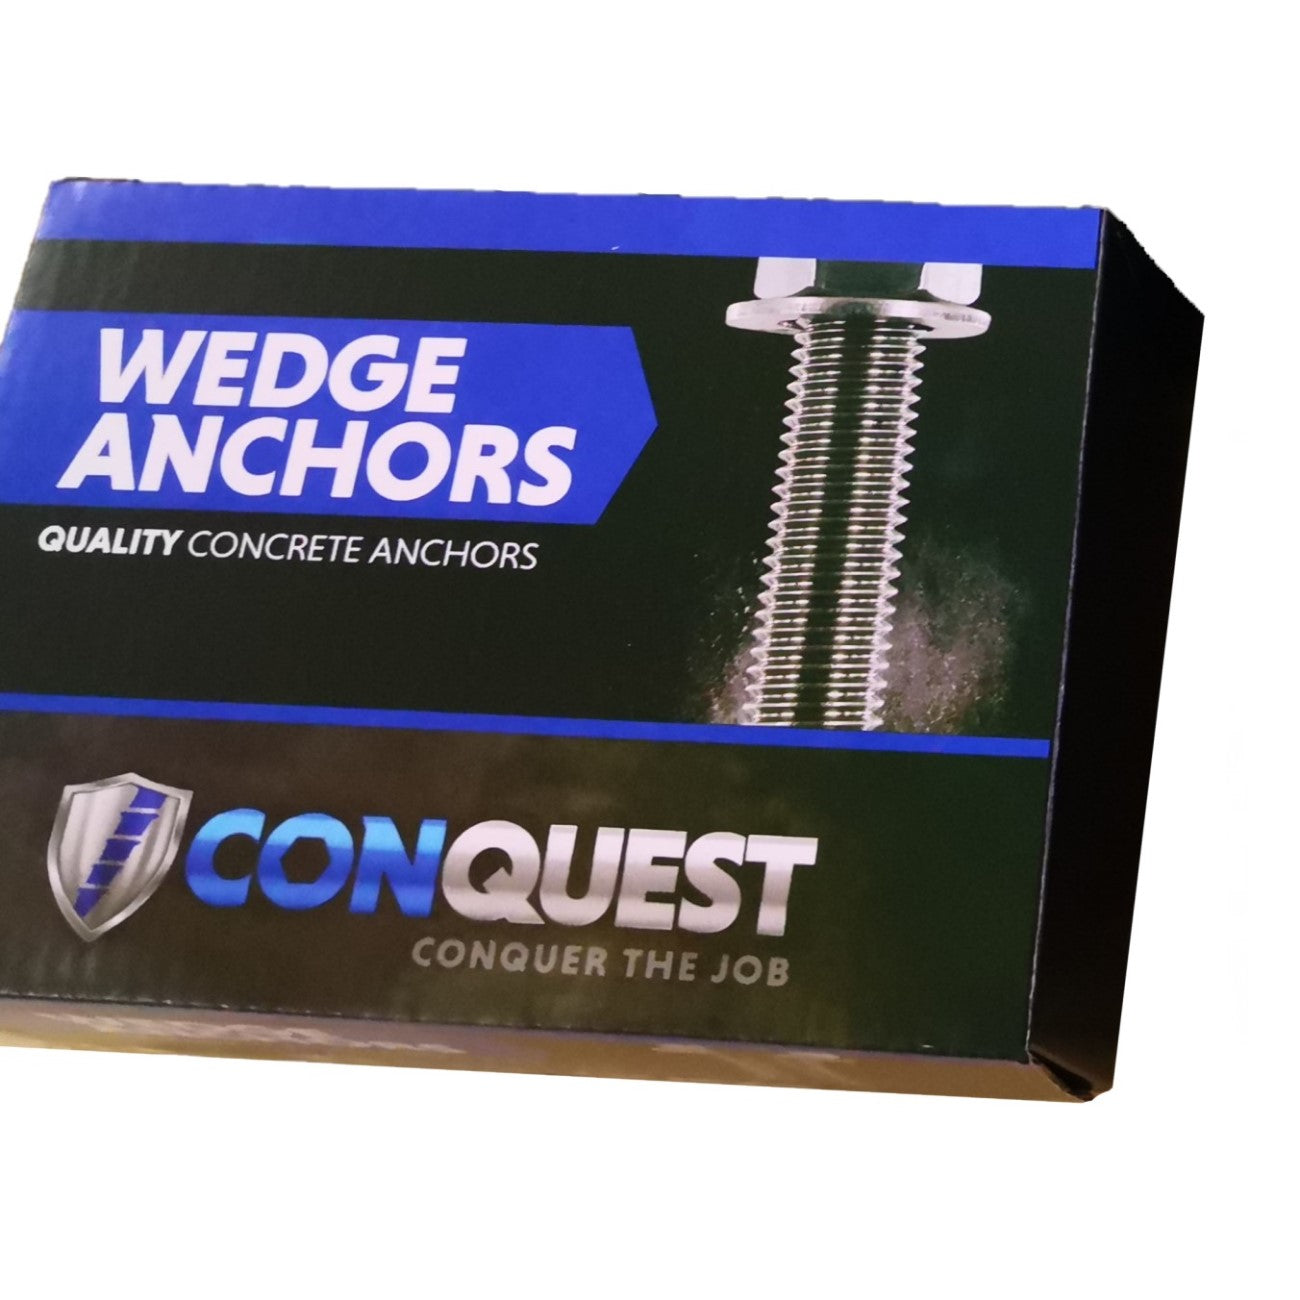 5/8" x 3-1/2" Conquest Wedge Anchors - 304 Stainless Steel, Pkg 25